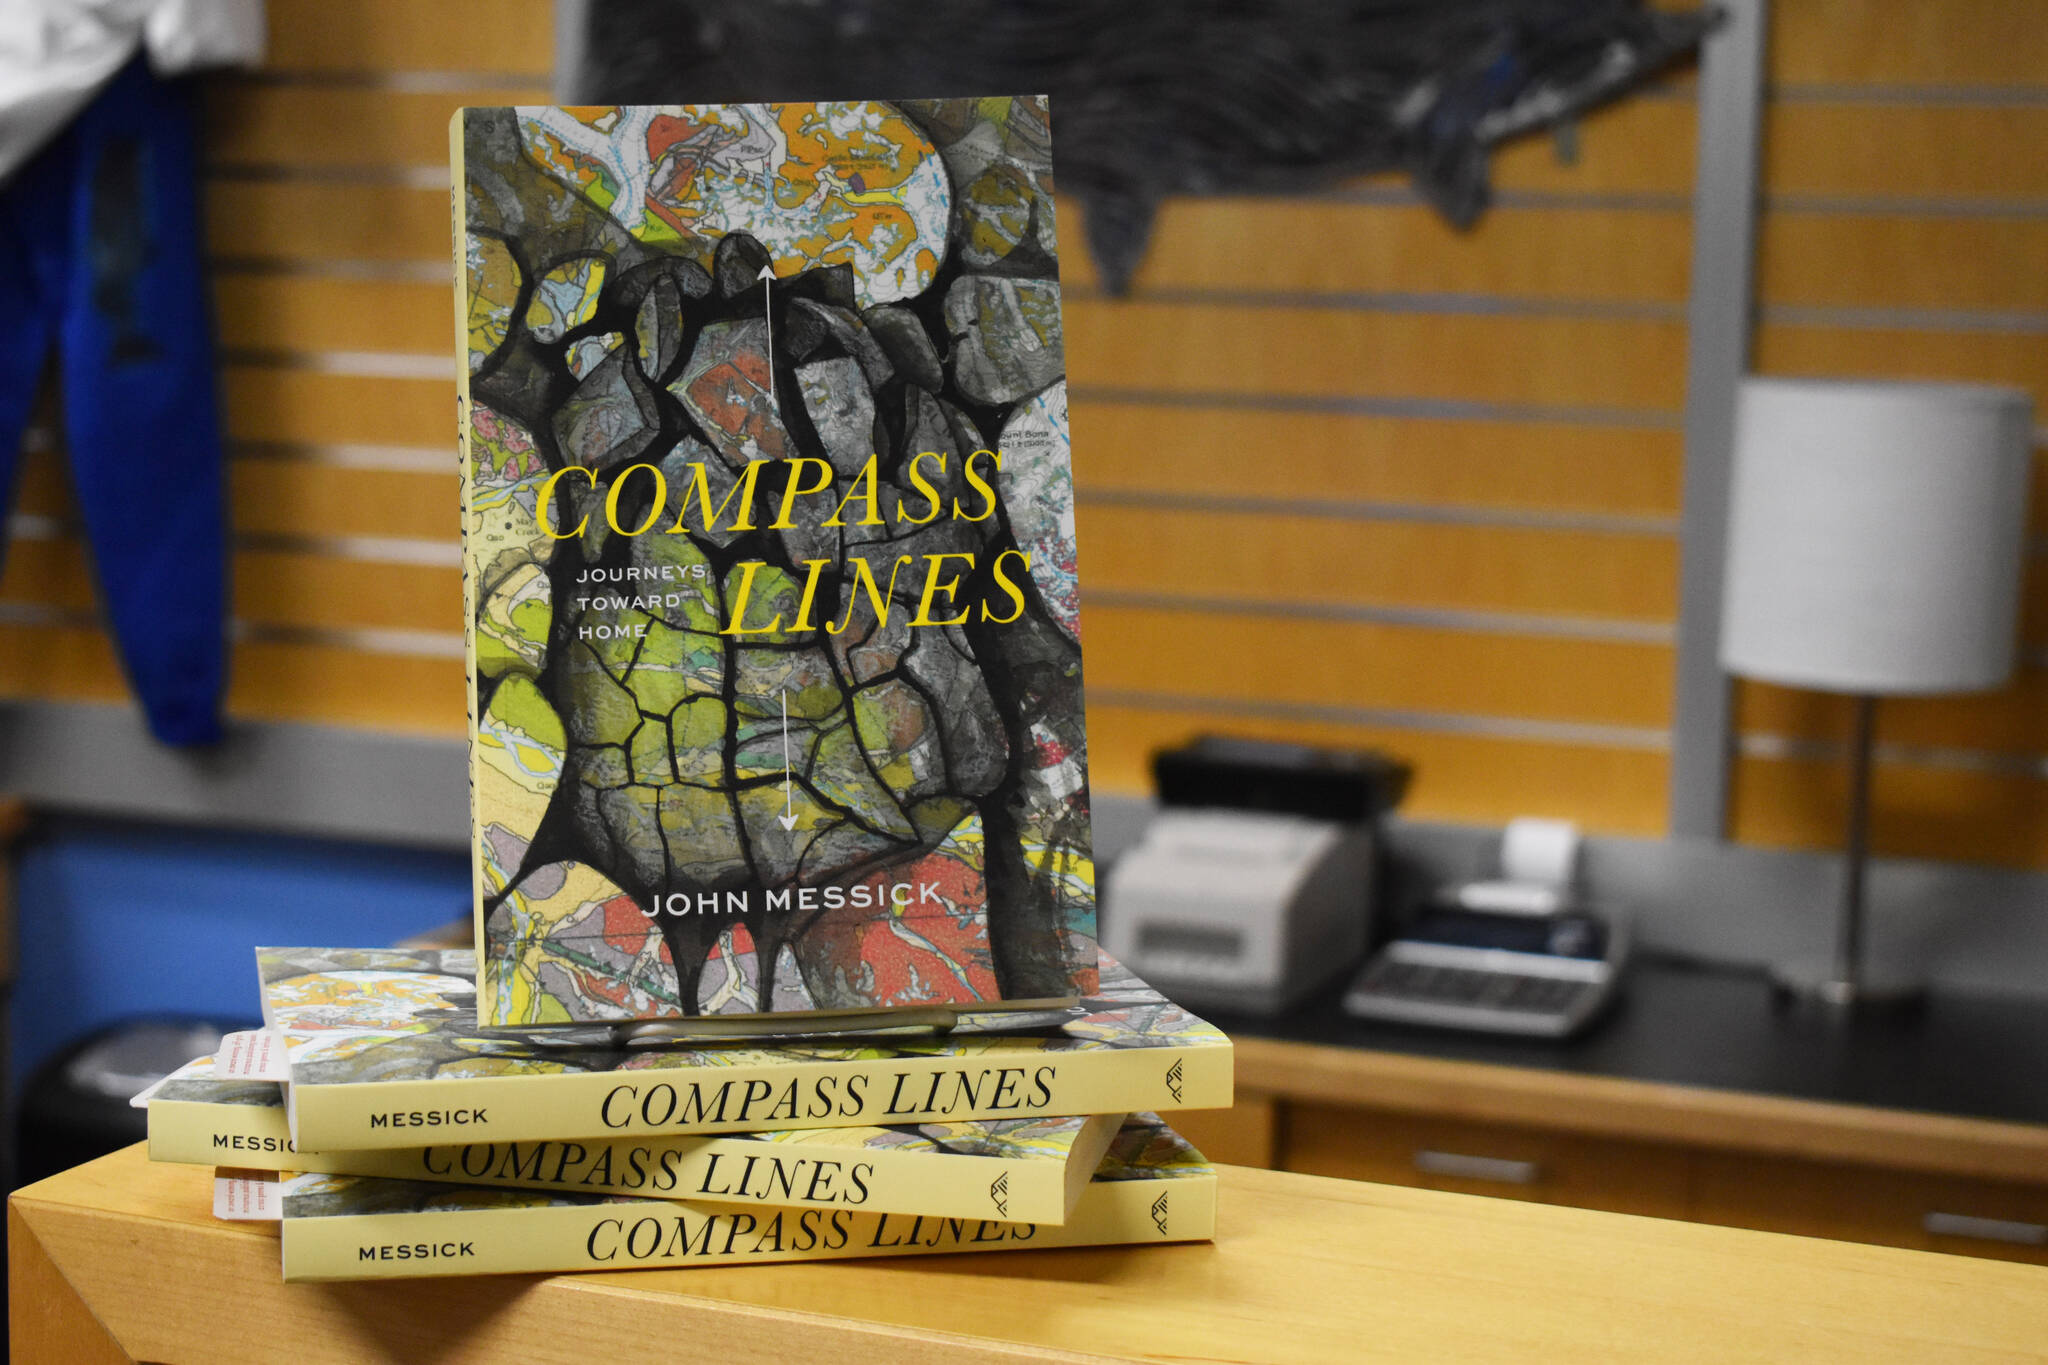 John Messick’s “Compass Lines” is displayed at the Kenai Peninsula College Bookstore in Soldotna, Alaska on Tuesday, March 28, 2023. (Jake Dye/Peninsula Clarion)